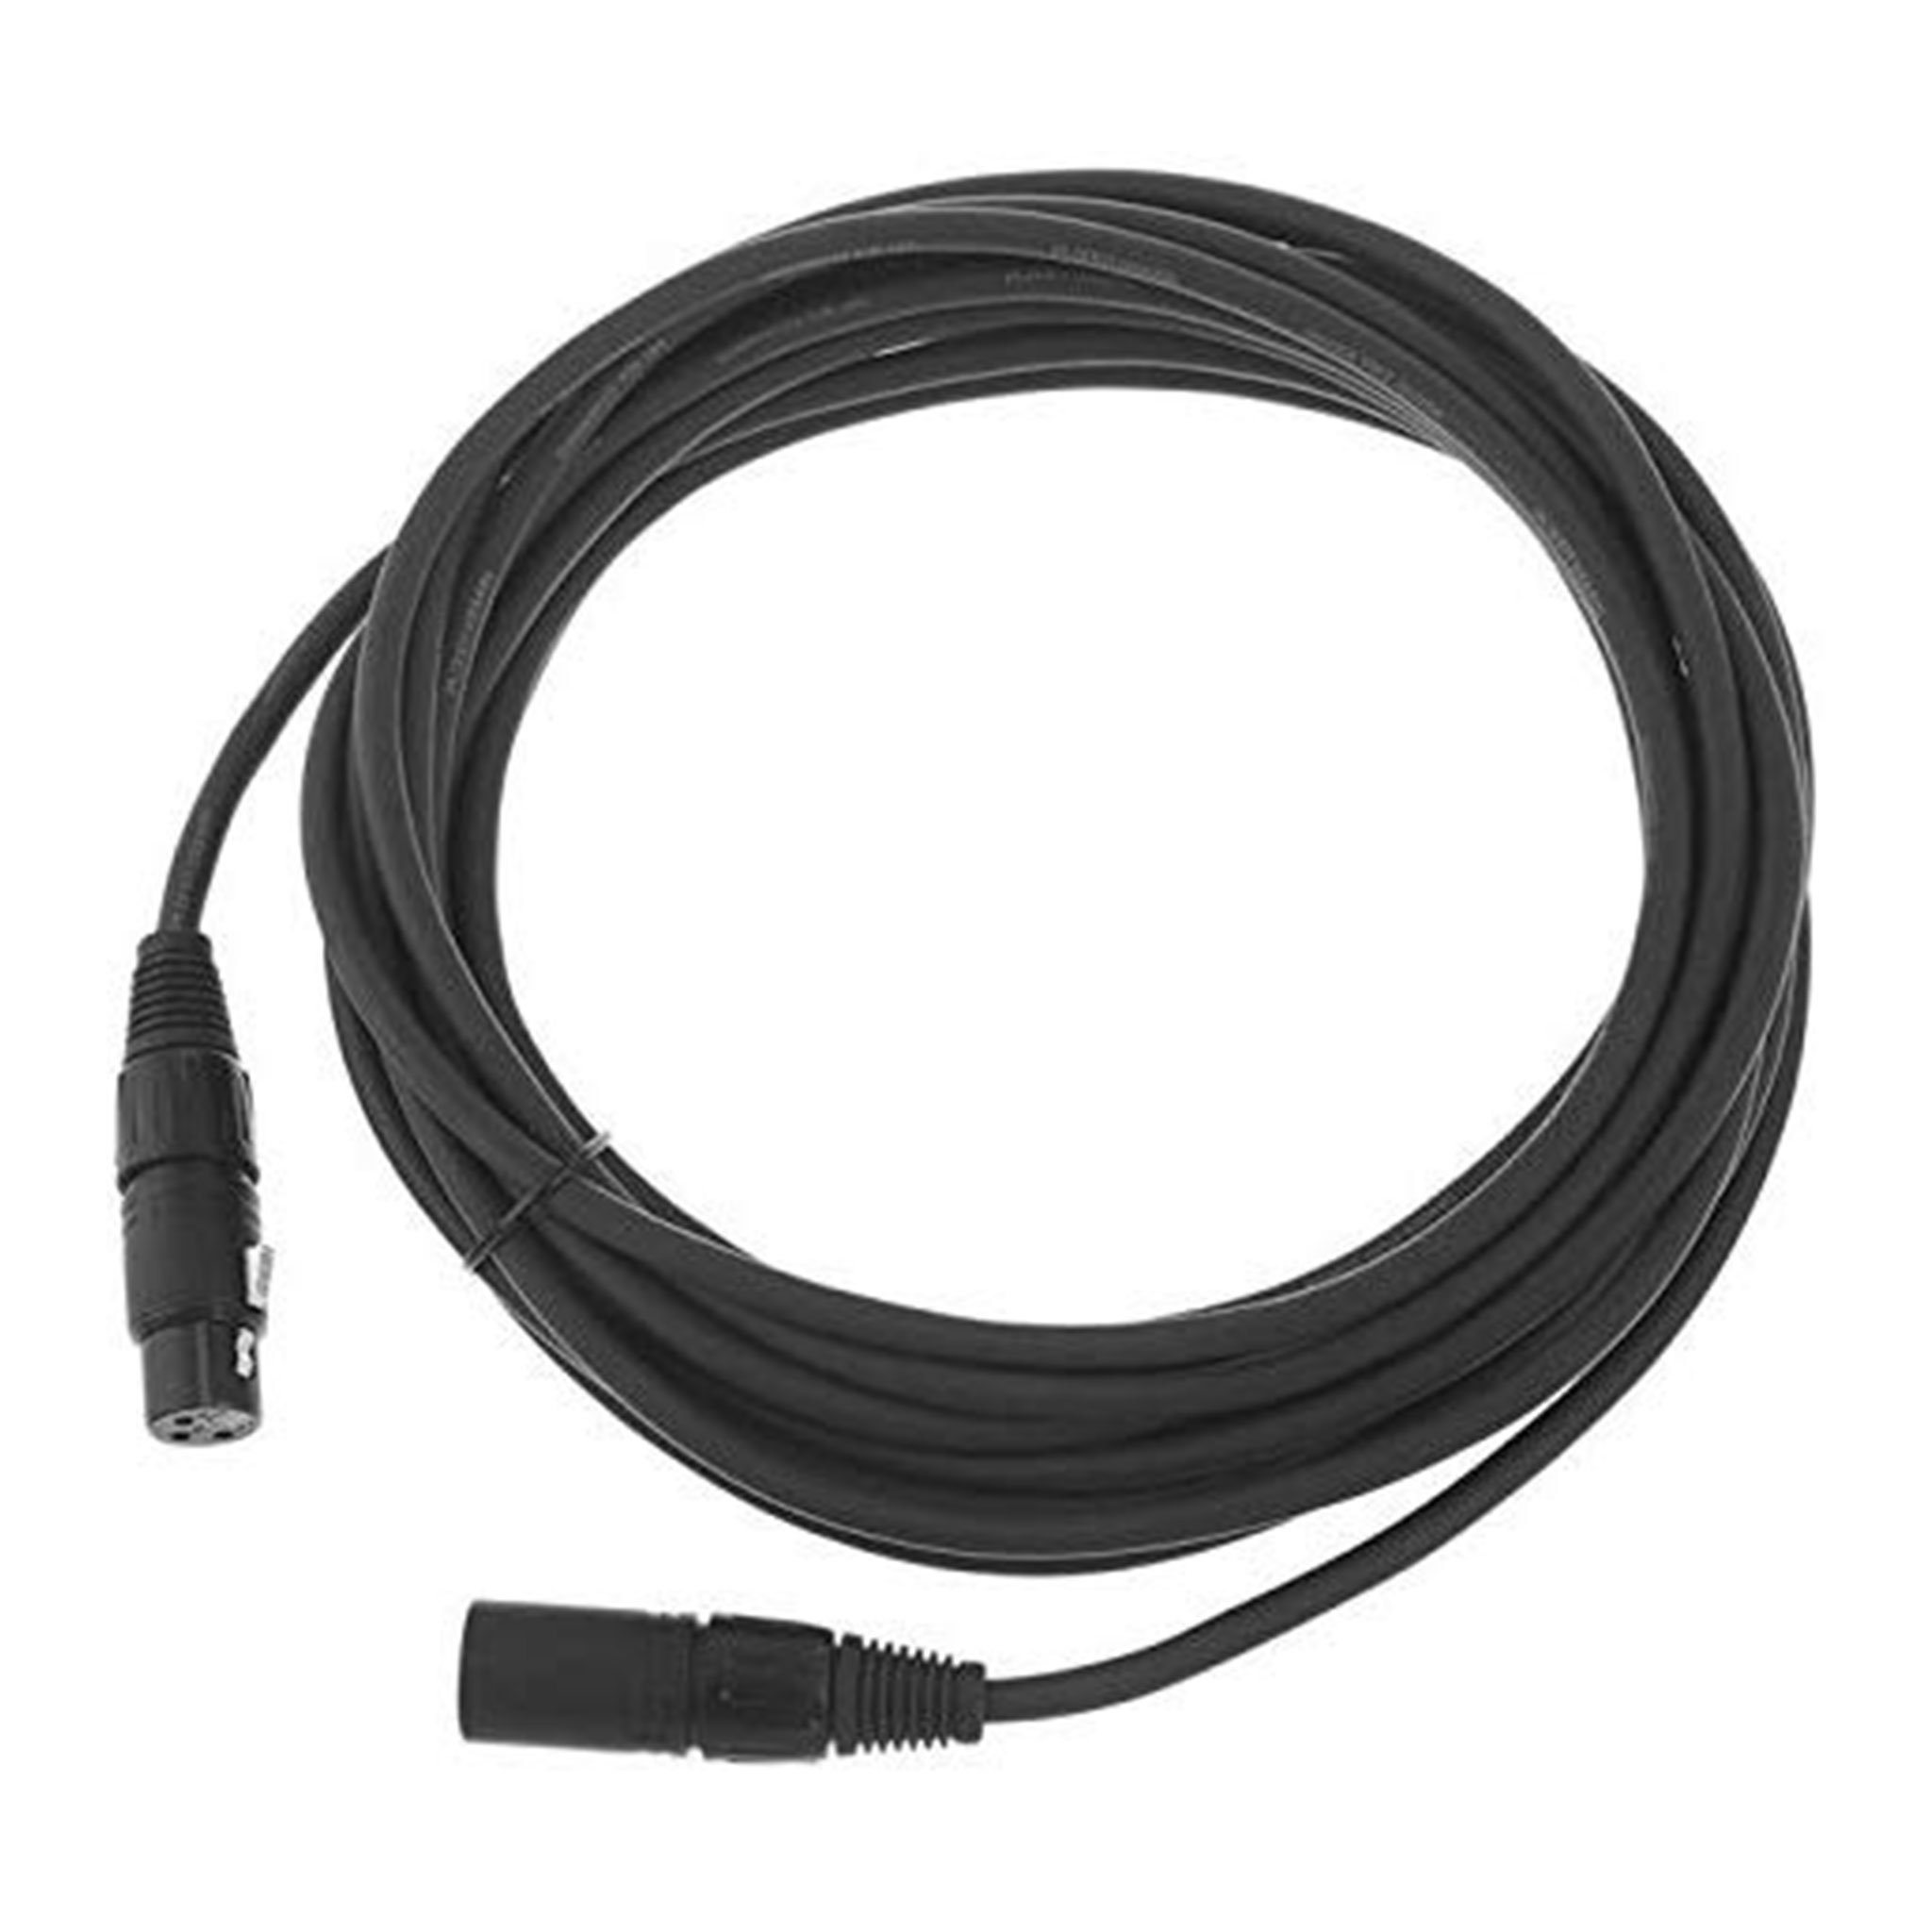 D'Addario Classic Series XLR Microphone Cable 25', DADPW-CMIC-25